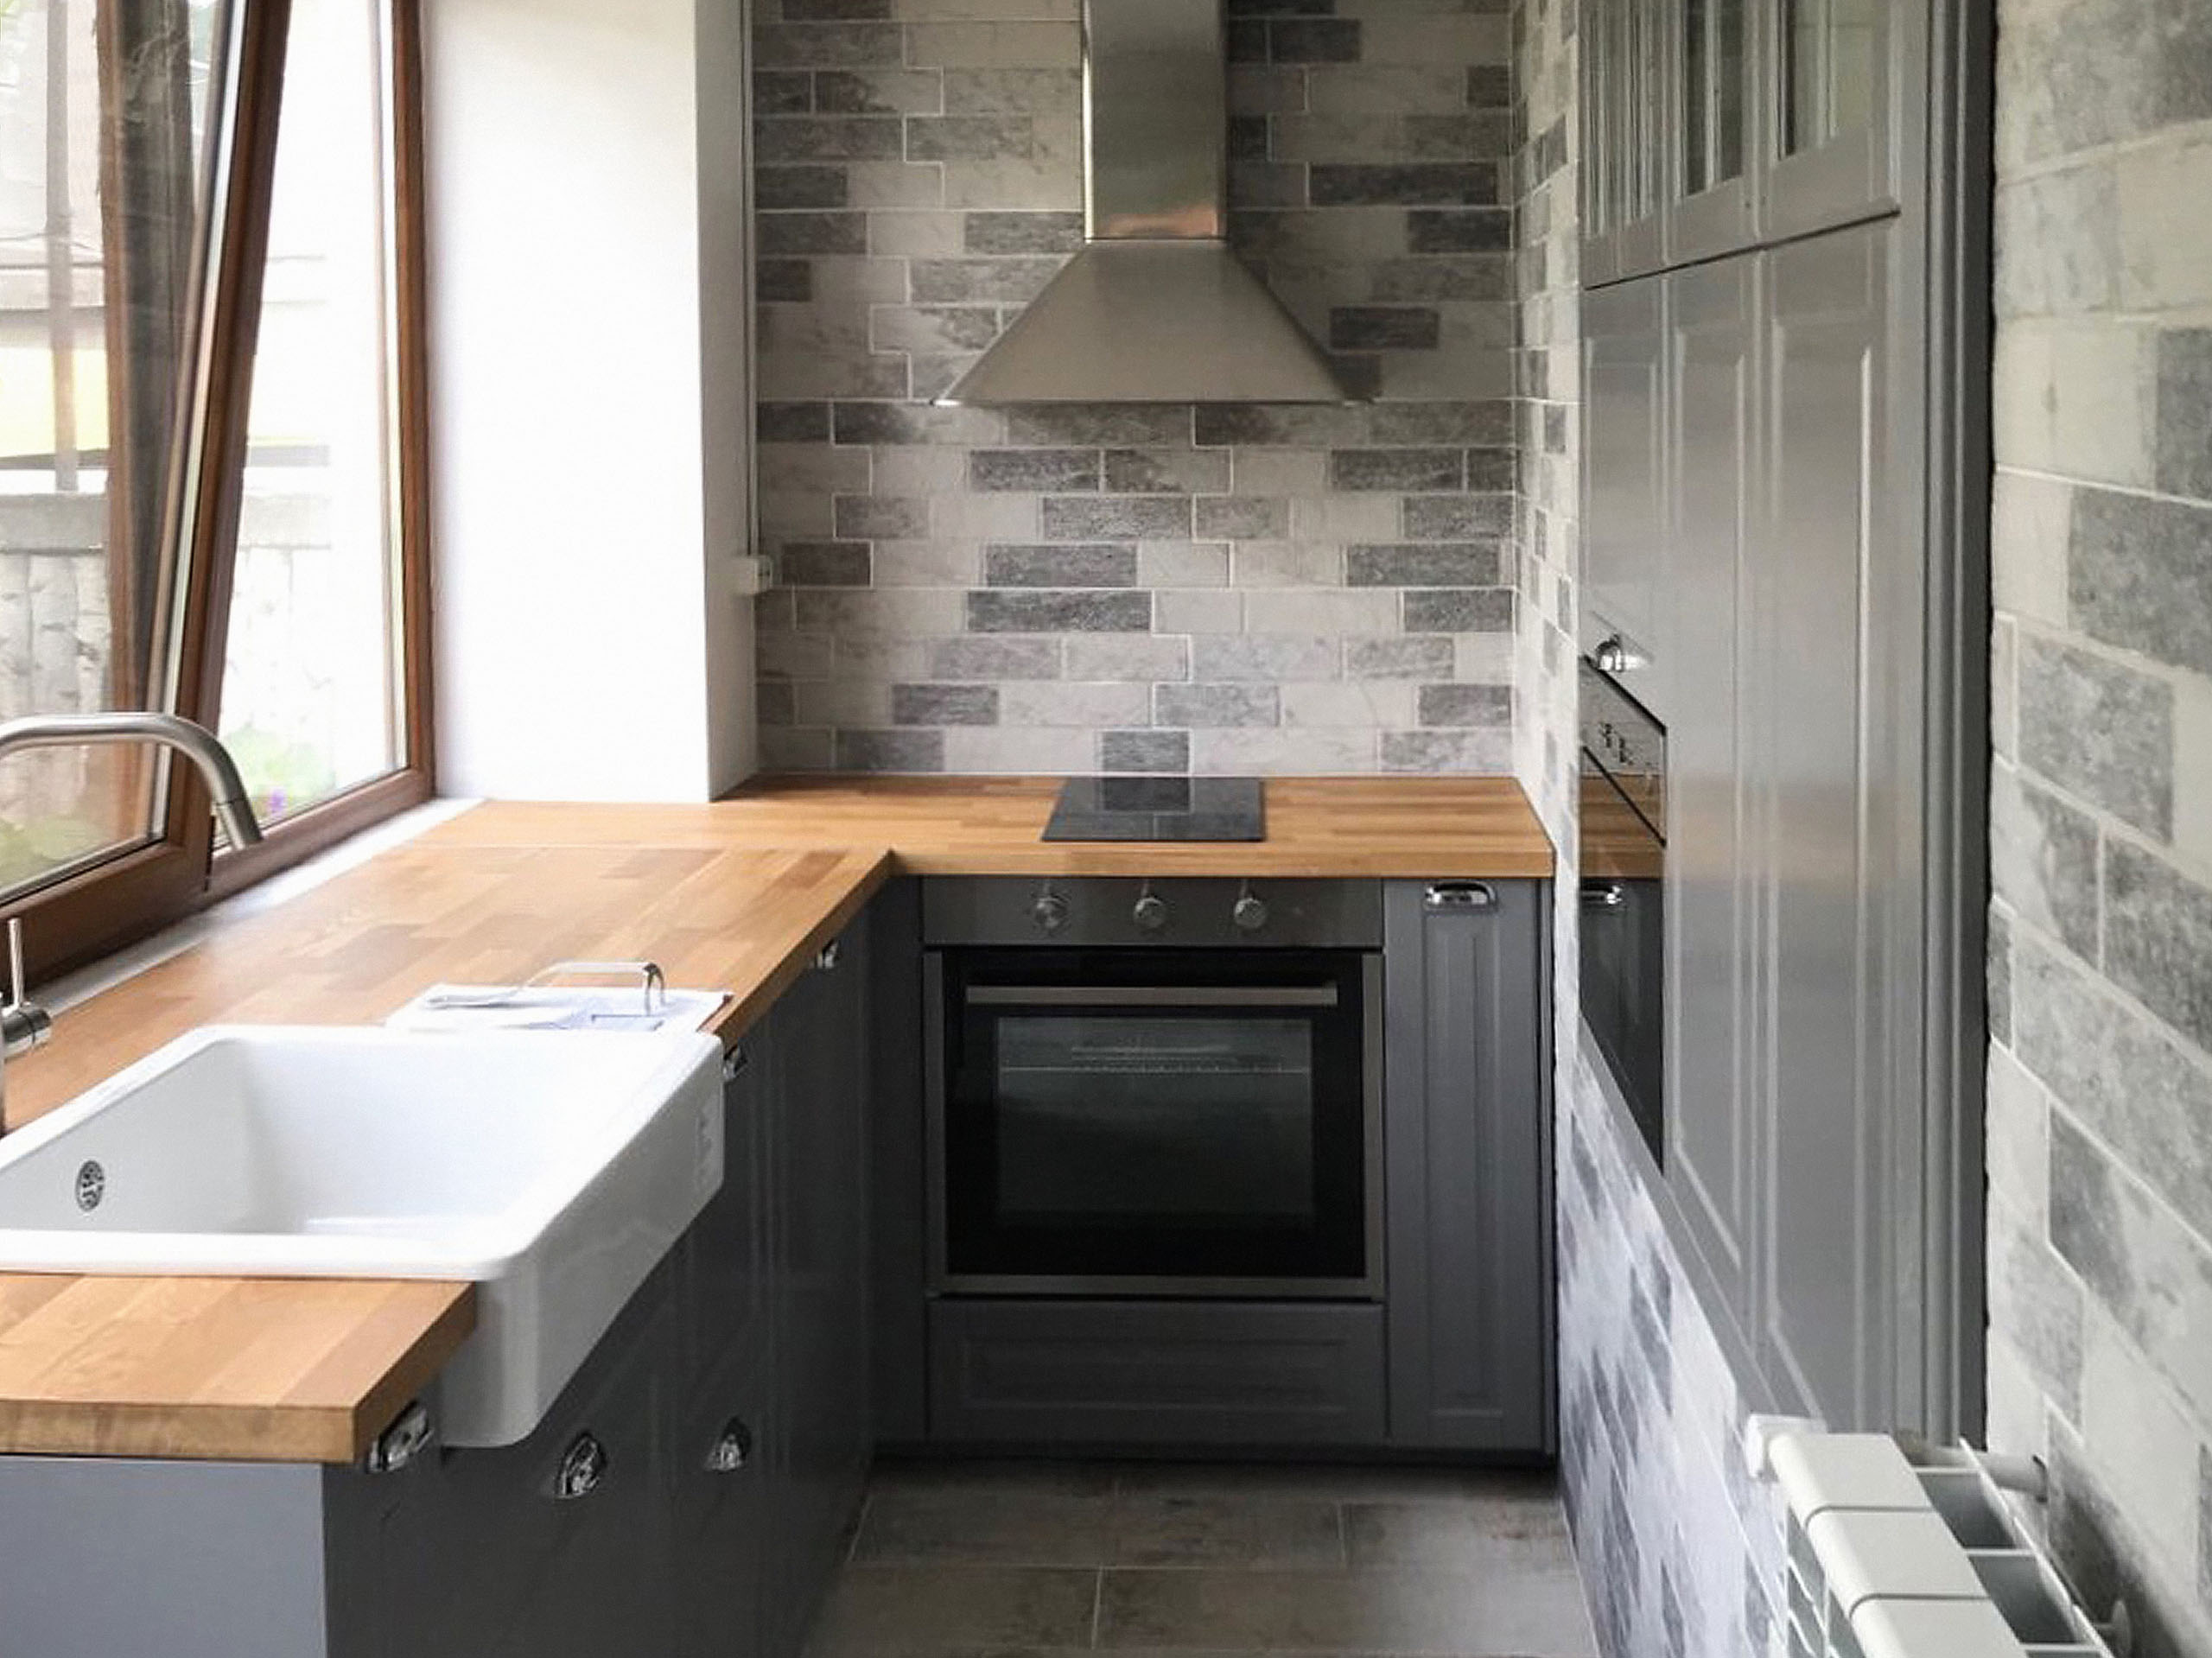 Dark grey BODBYN IKEA kitchen in a country style cottage